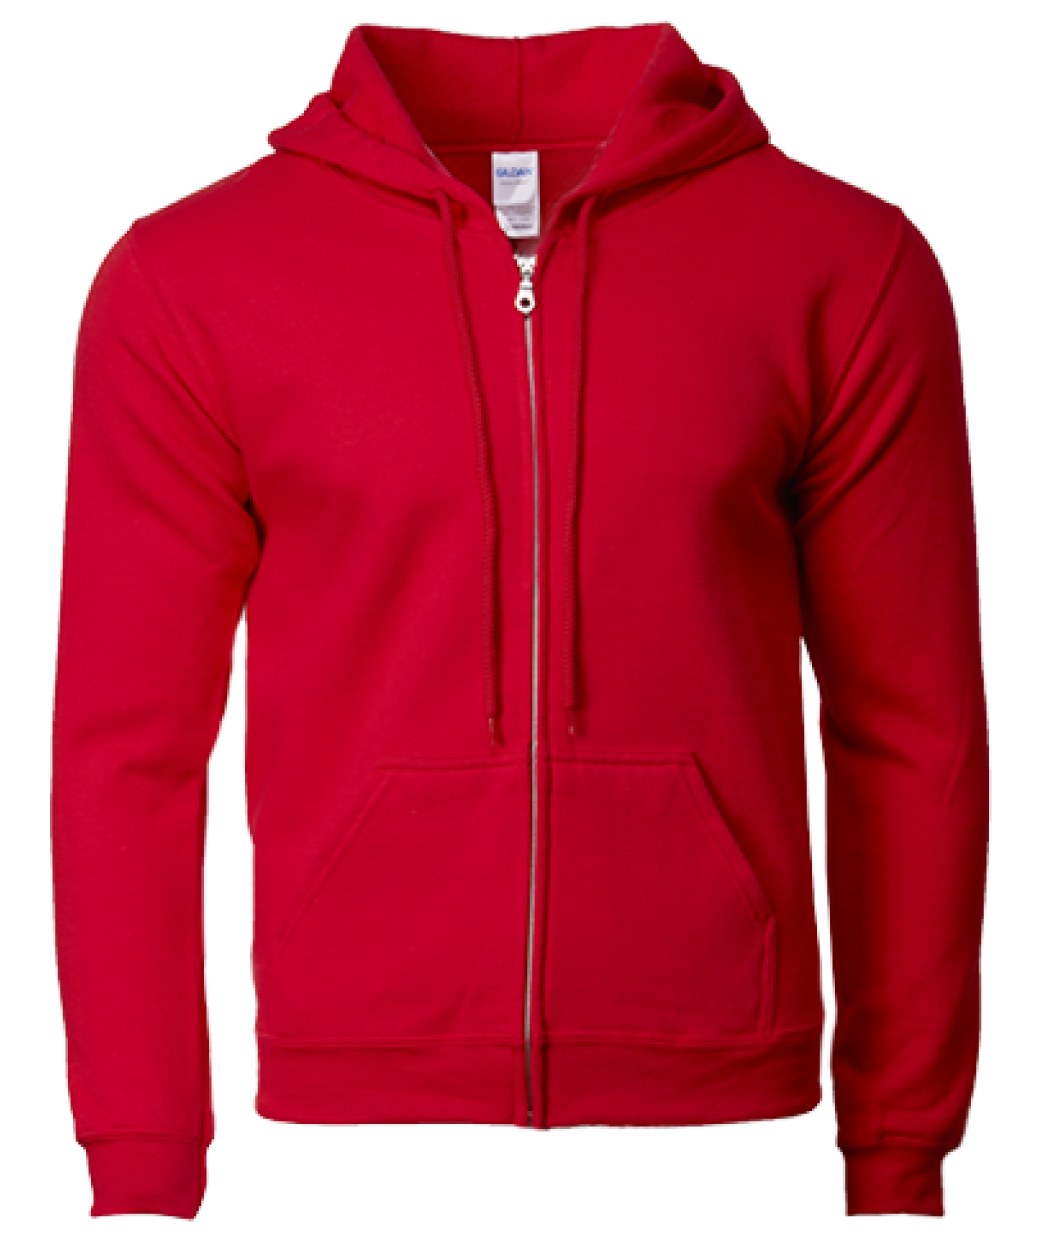 Gildan Heavy Blend 88600 285GSM Adult Unisex Full Zip Hooded Sweatshirt Pouch Pocket Poly-cotton Hoodies Jacket Group A WHITE/RED/HELICONIA/PURPLE/ROYAL 88600